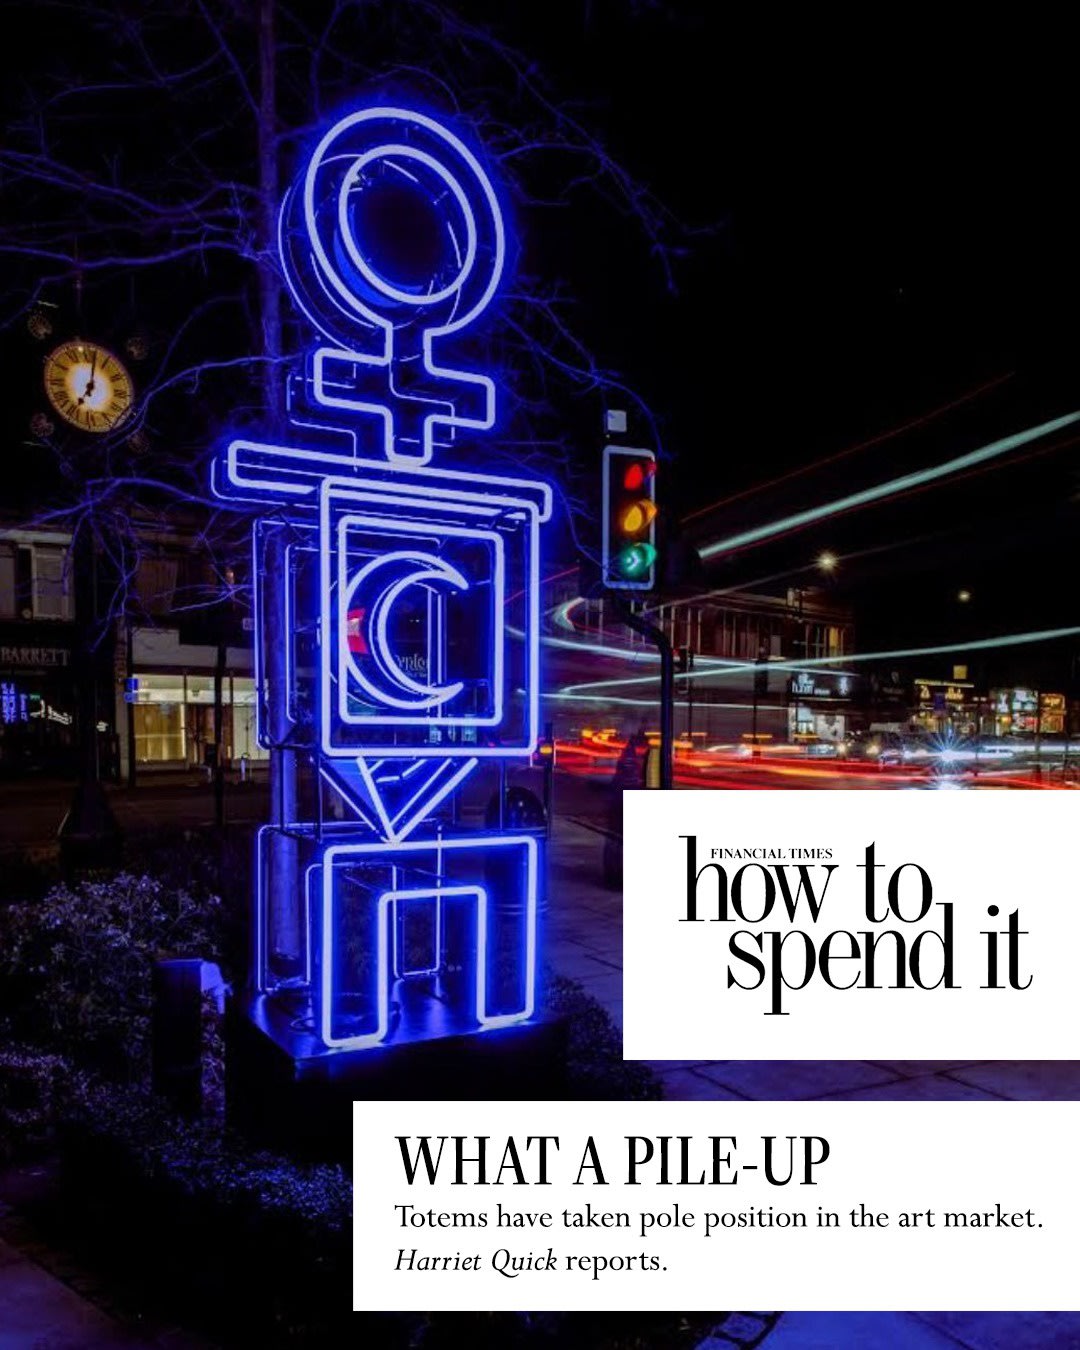 Financial Times; How to Spend it